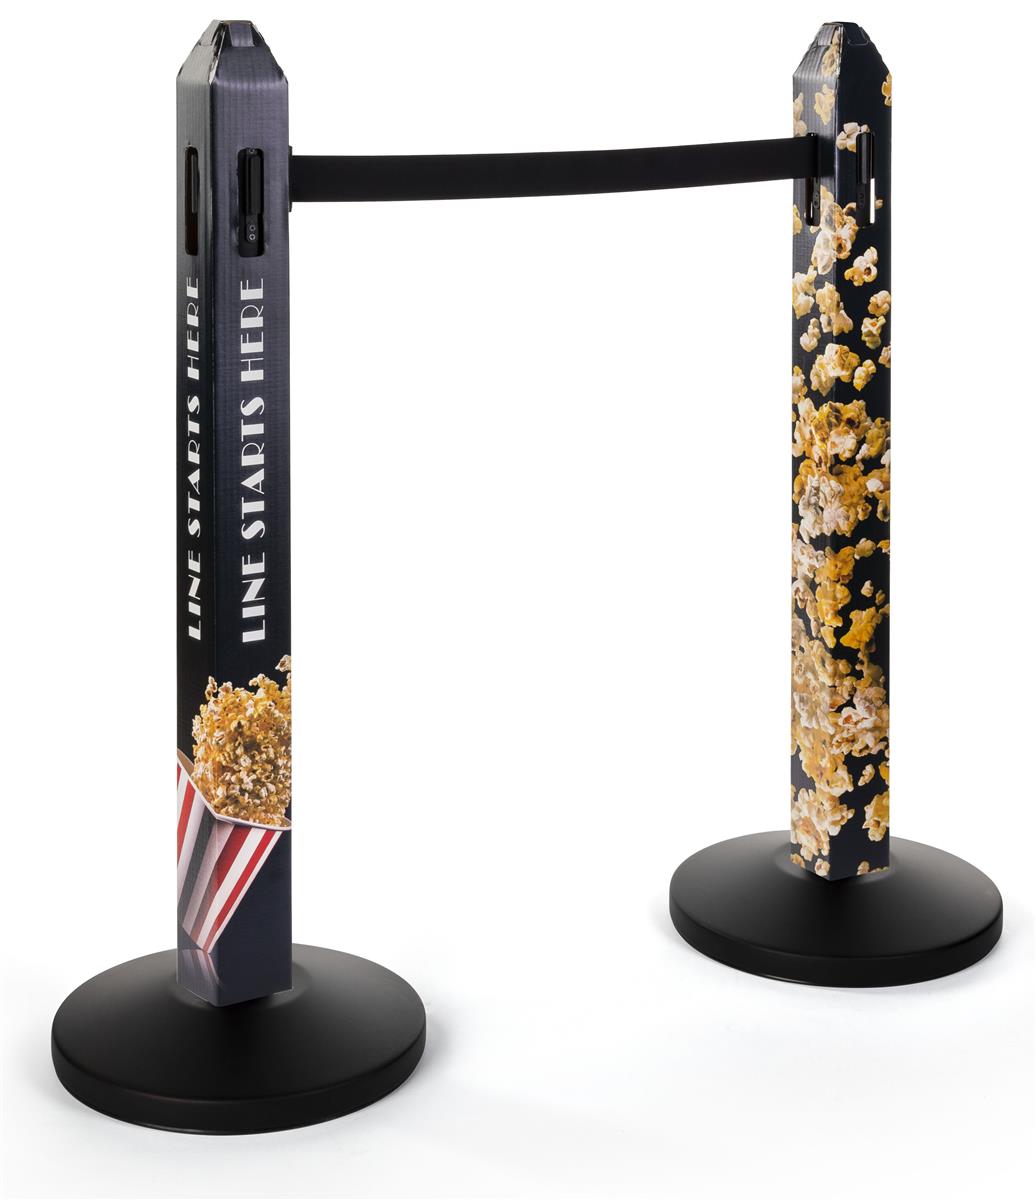 Stanchion cover with custom graphics comes as a set of two